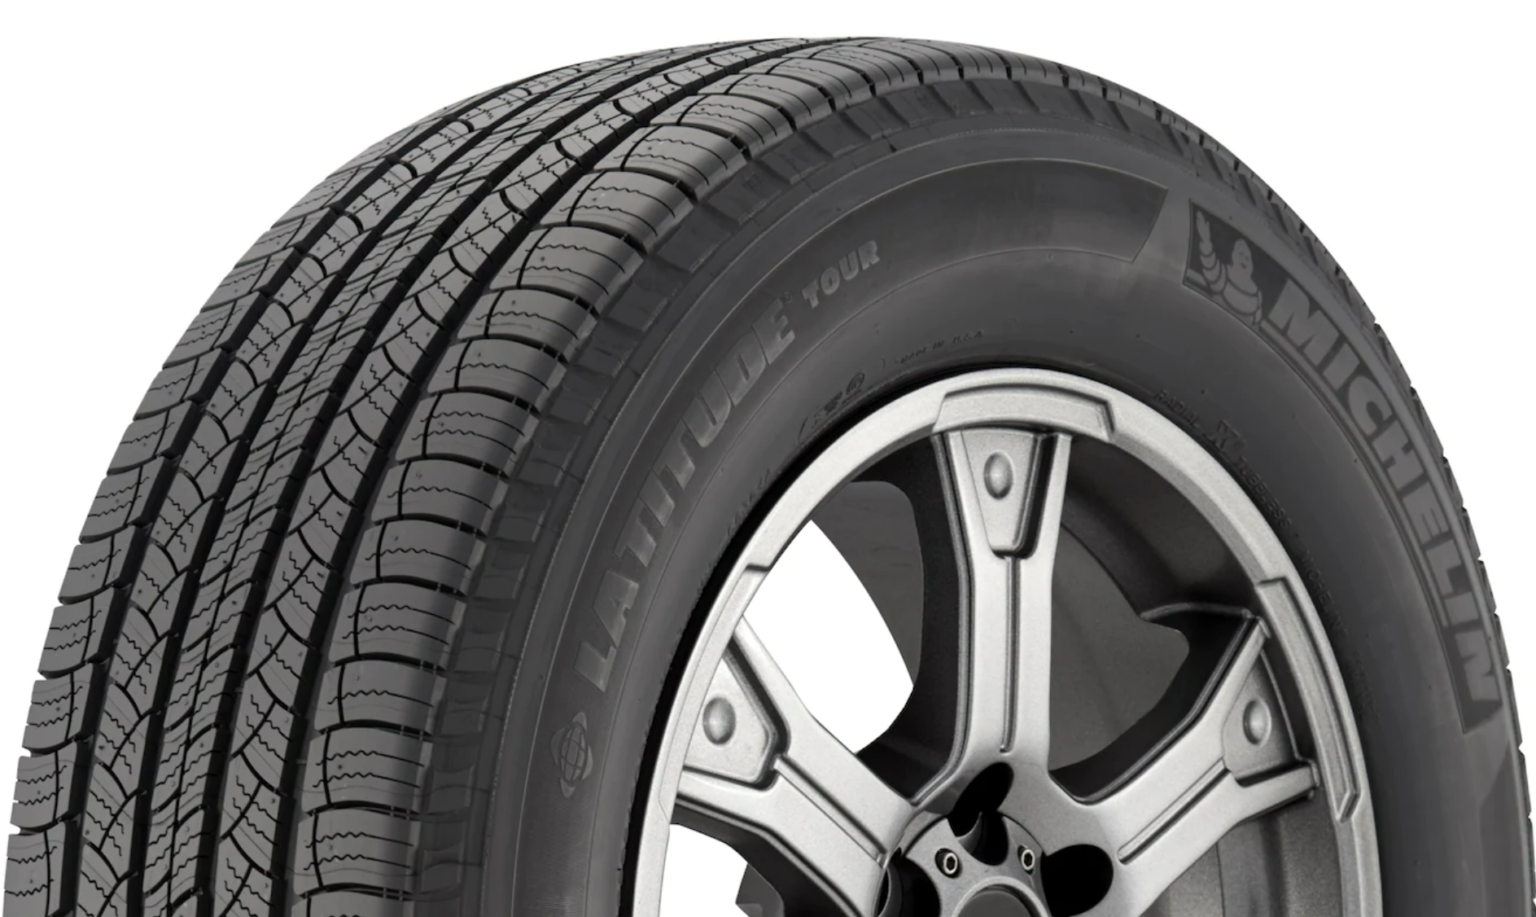 michelin-latitude-tour-review-for-2021-drive55